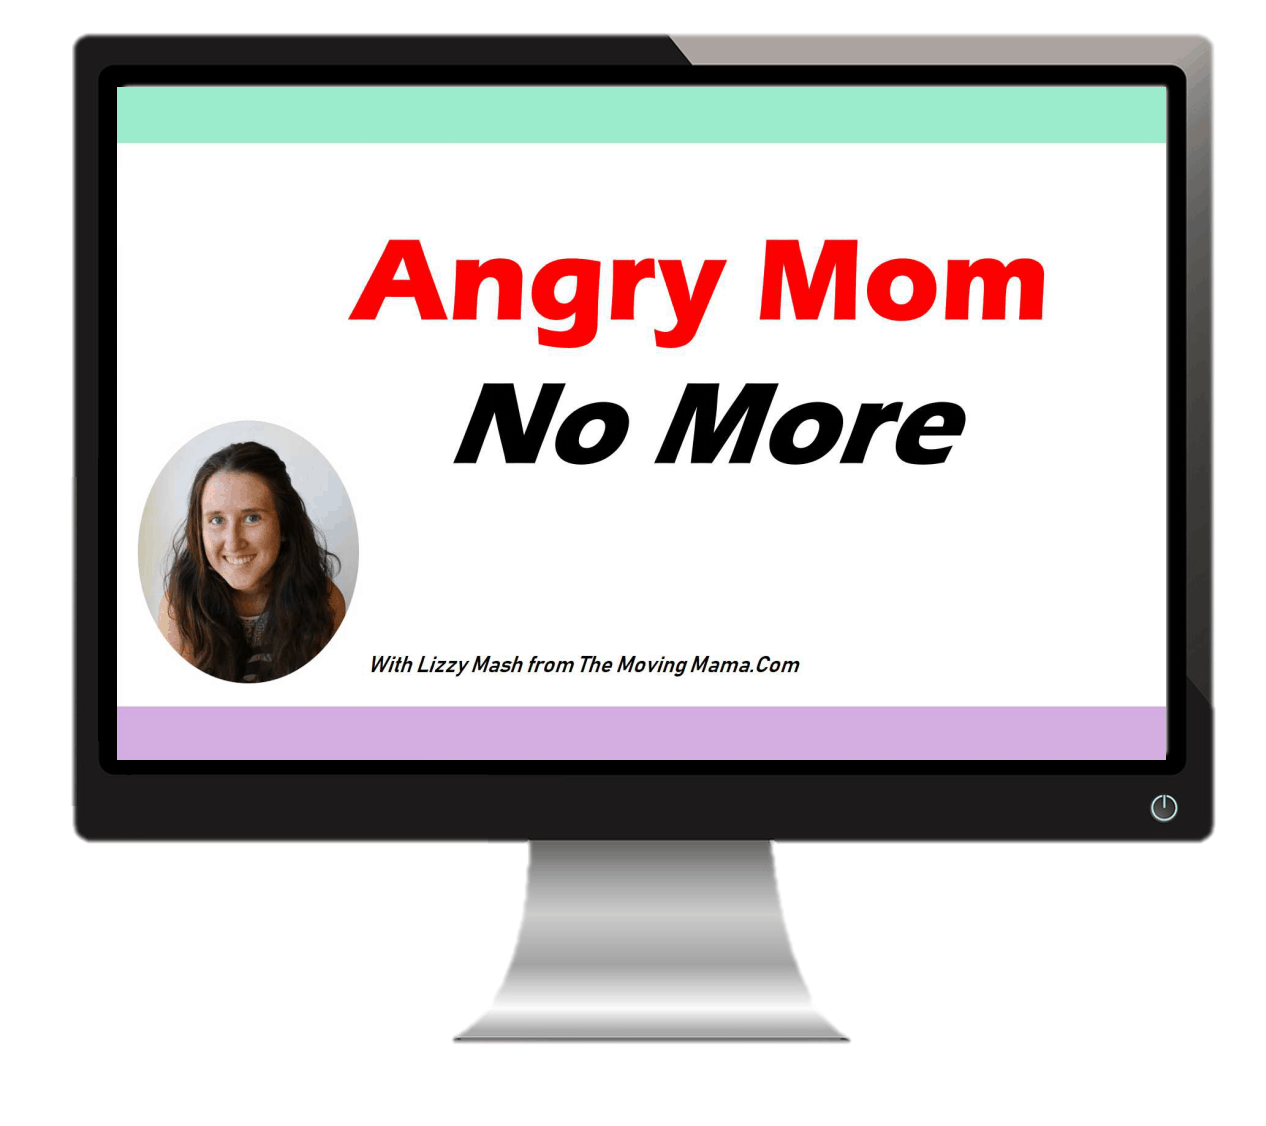 Angry Mom No More - Written on computer screen as it's an ad for a premium online course